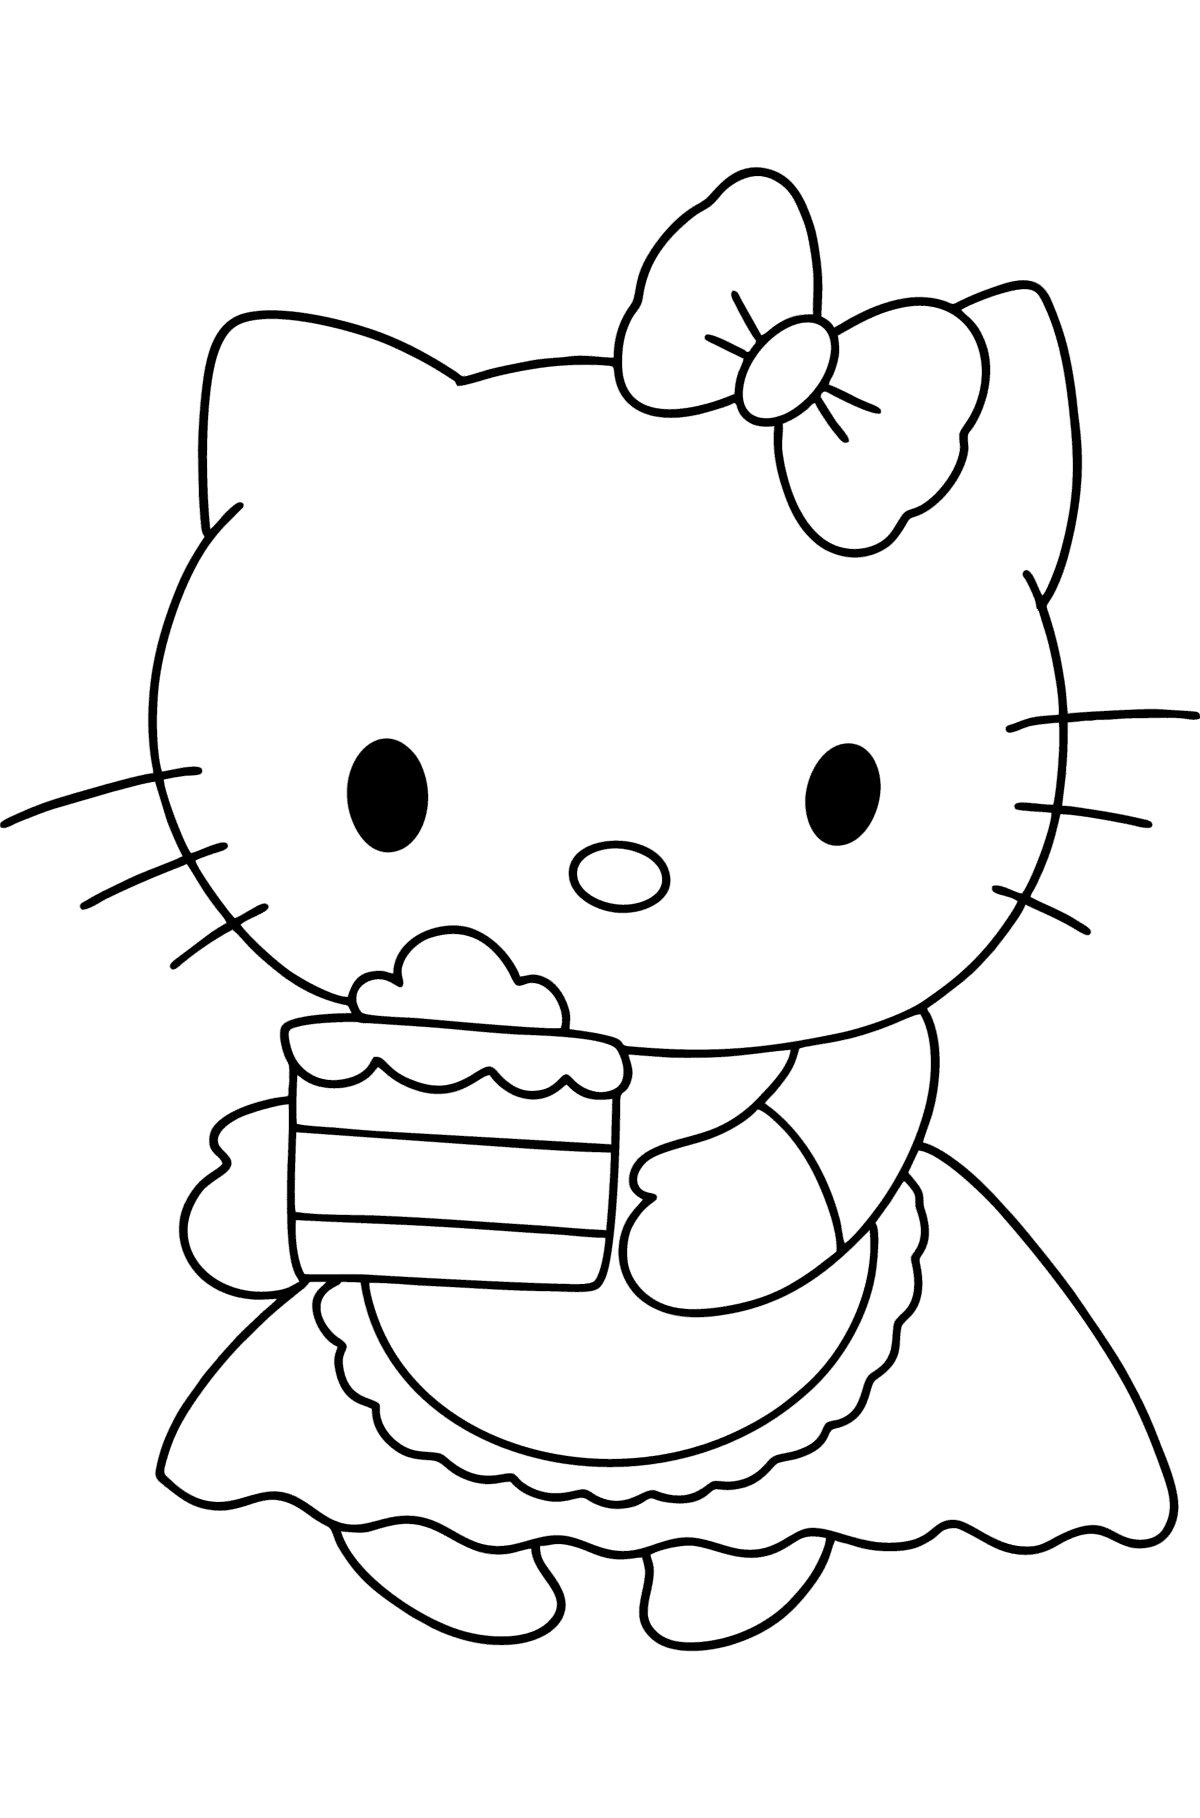 Hello Kitty and cake coloring page - Coloring Pages for Kids